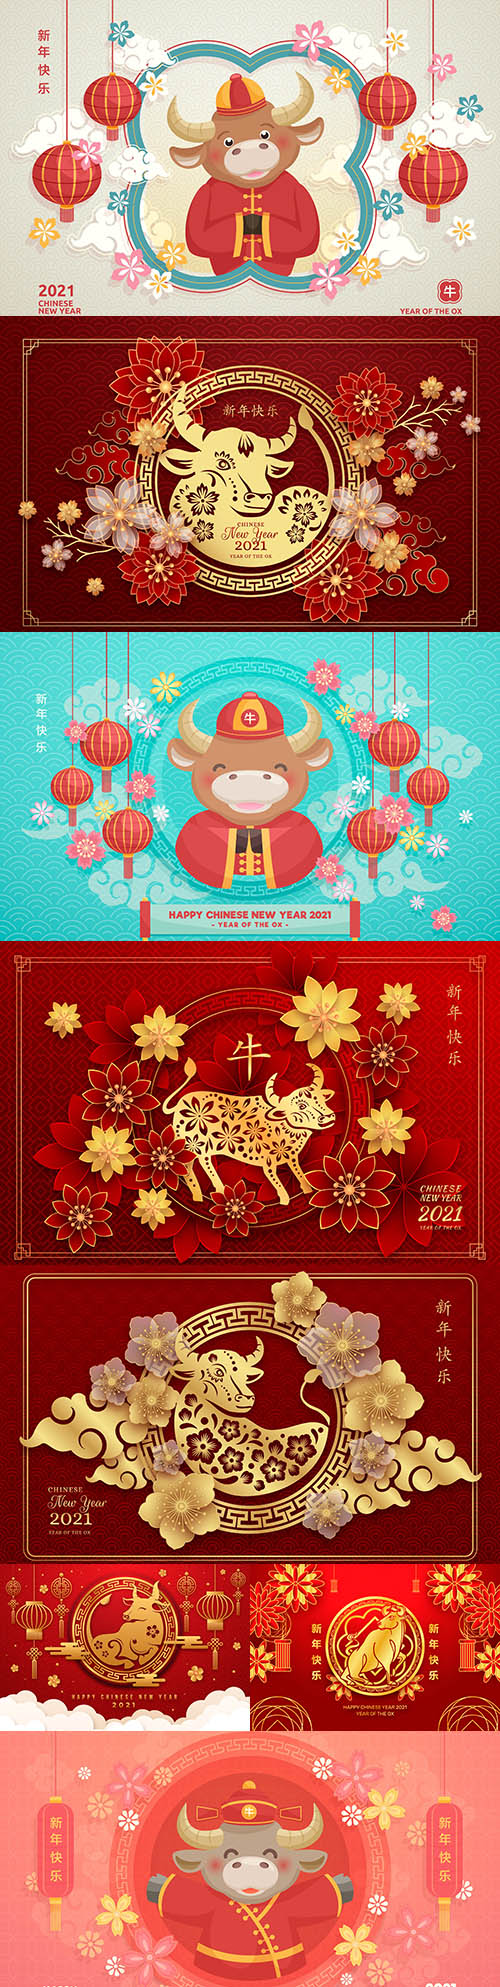 Golden and colorful Chinese New Year 2021 design
